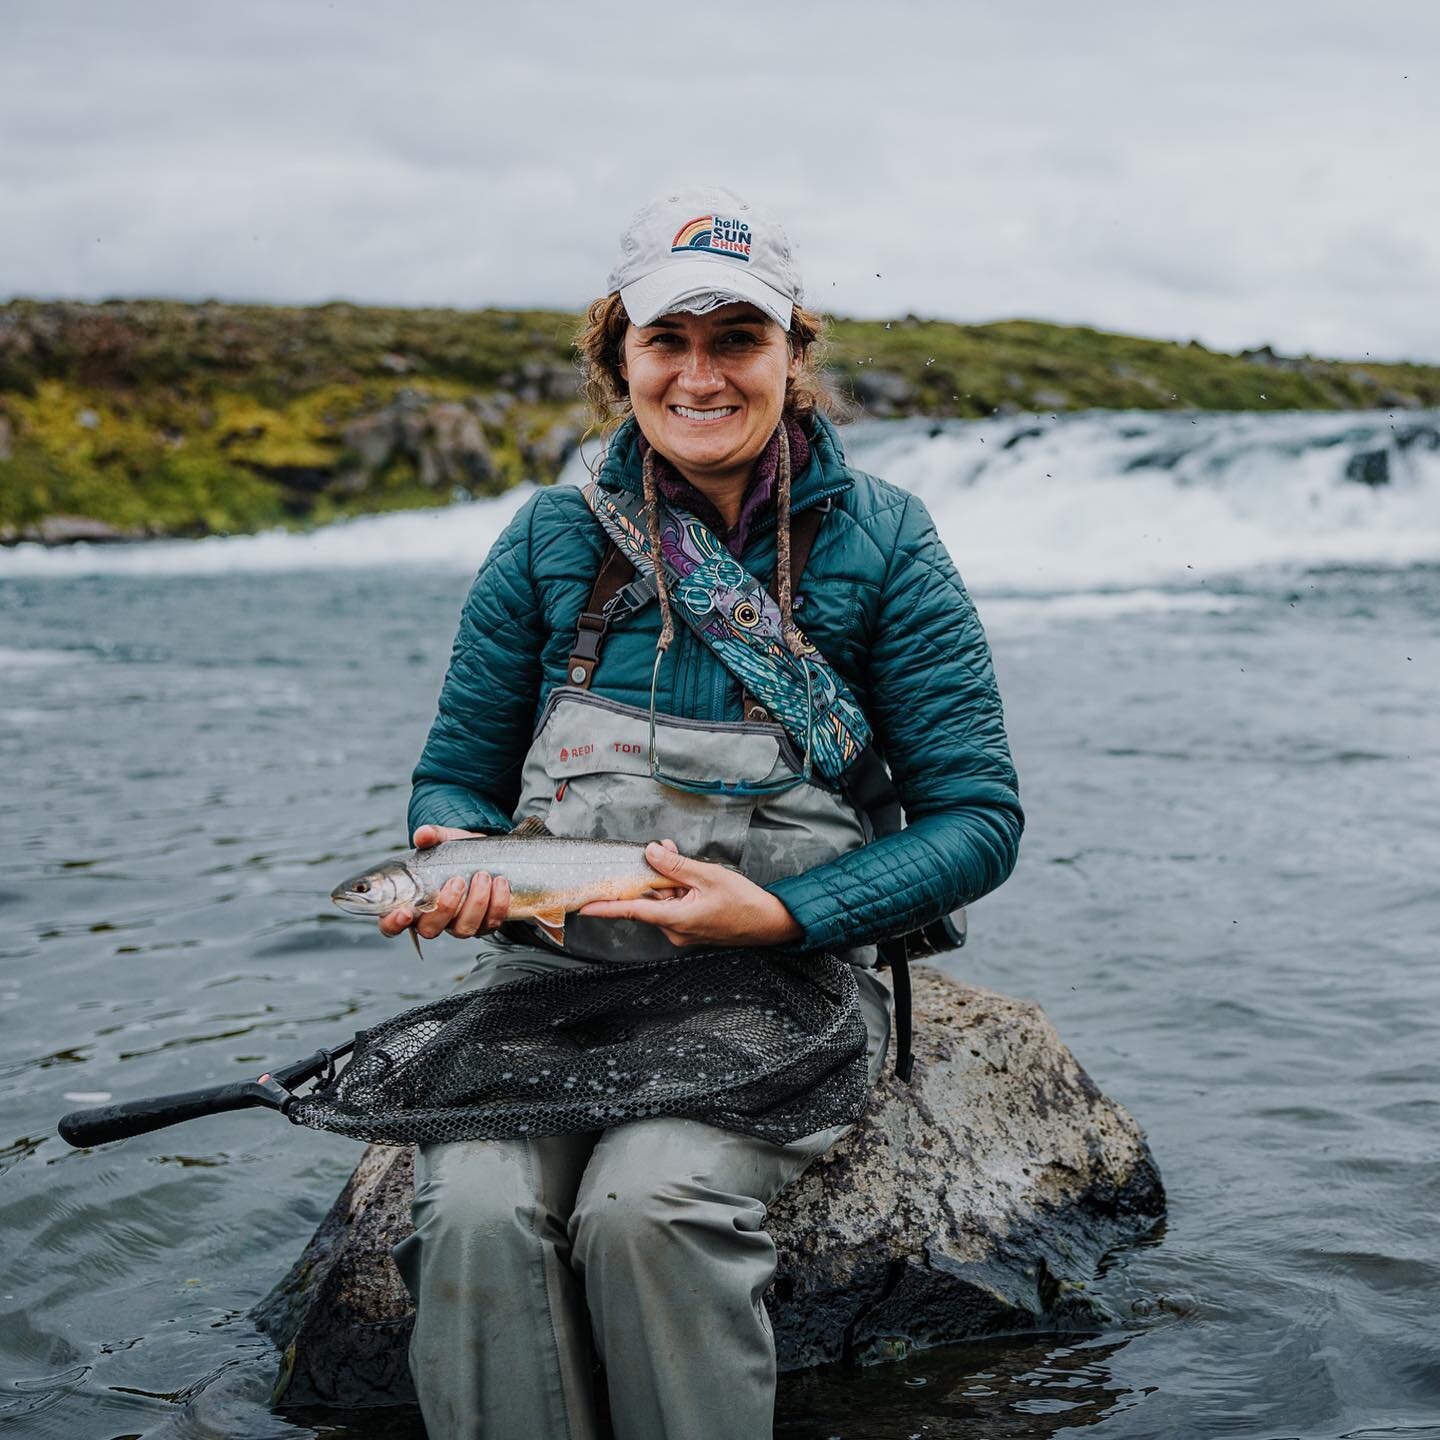 Iceland Fly Fishing 2022, Days 3 &amp; 4! After taking in the beautiful Highlands, Fish Partner sent us to an absolutely stunning river&hellip;with a drive through a LAVA FIELD. I have no idea how our rental made it so far up the road (driving nearly